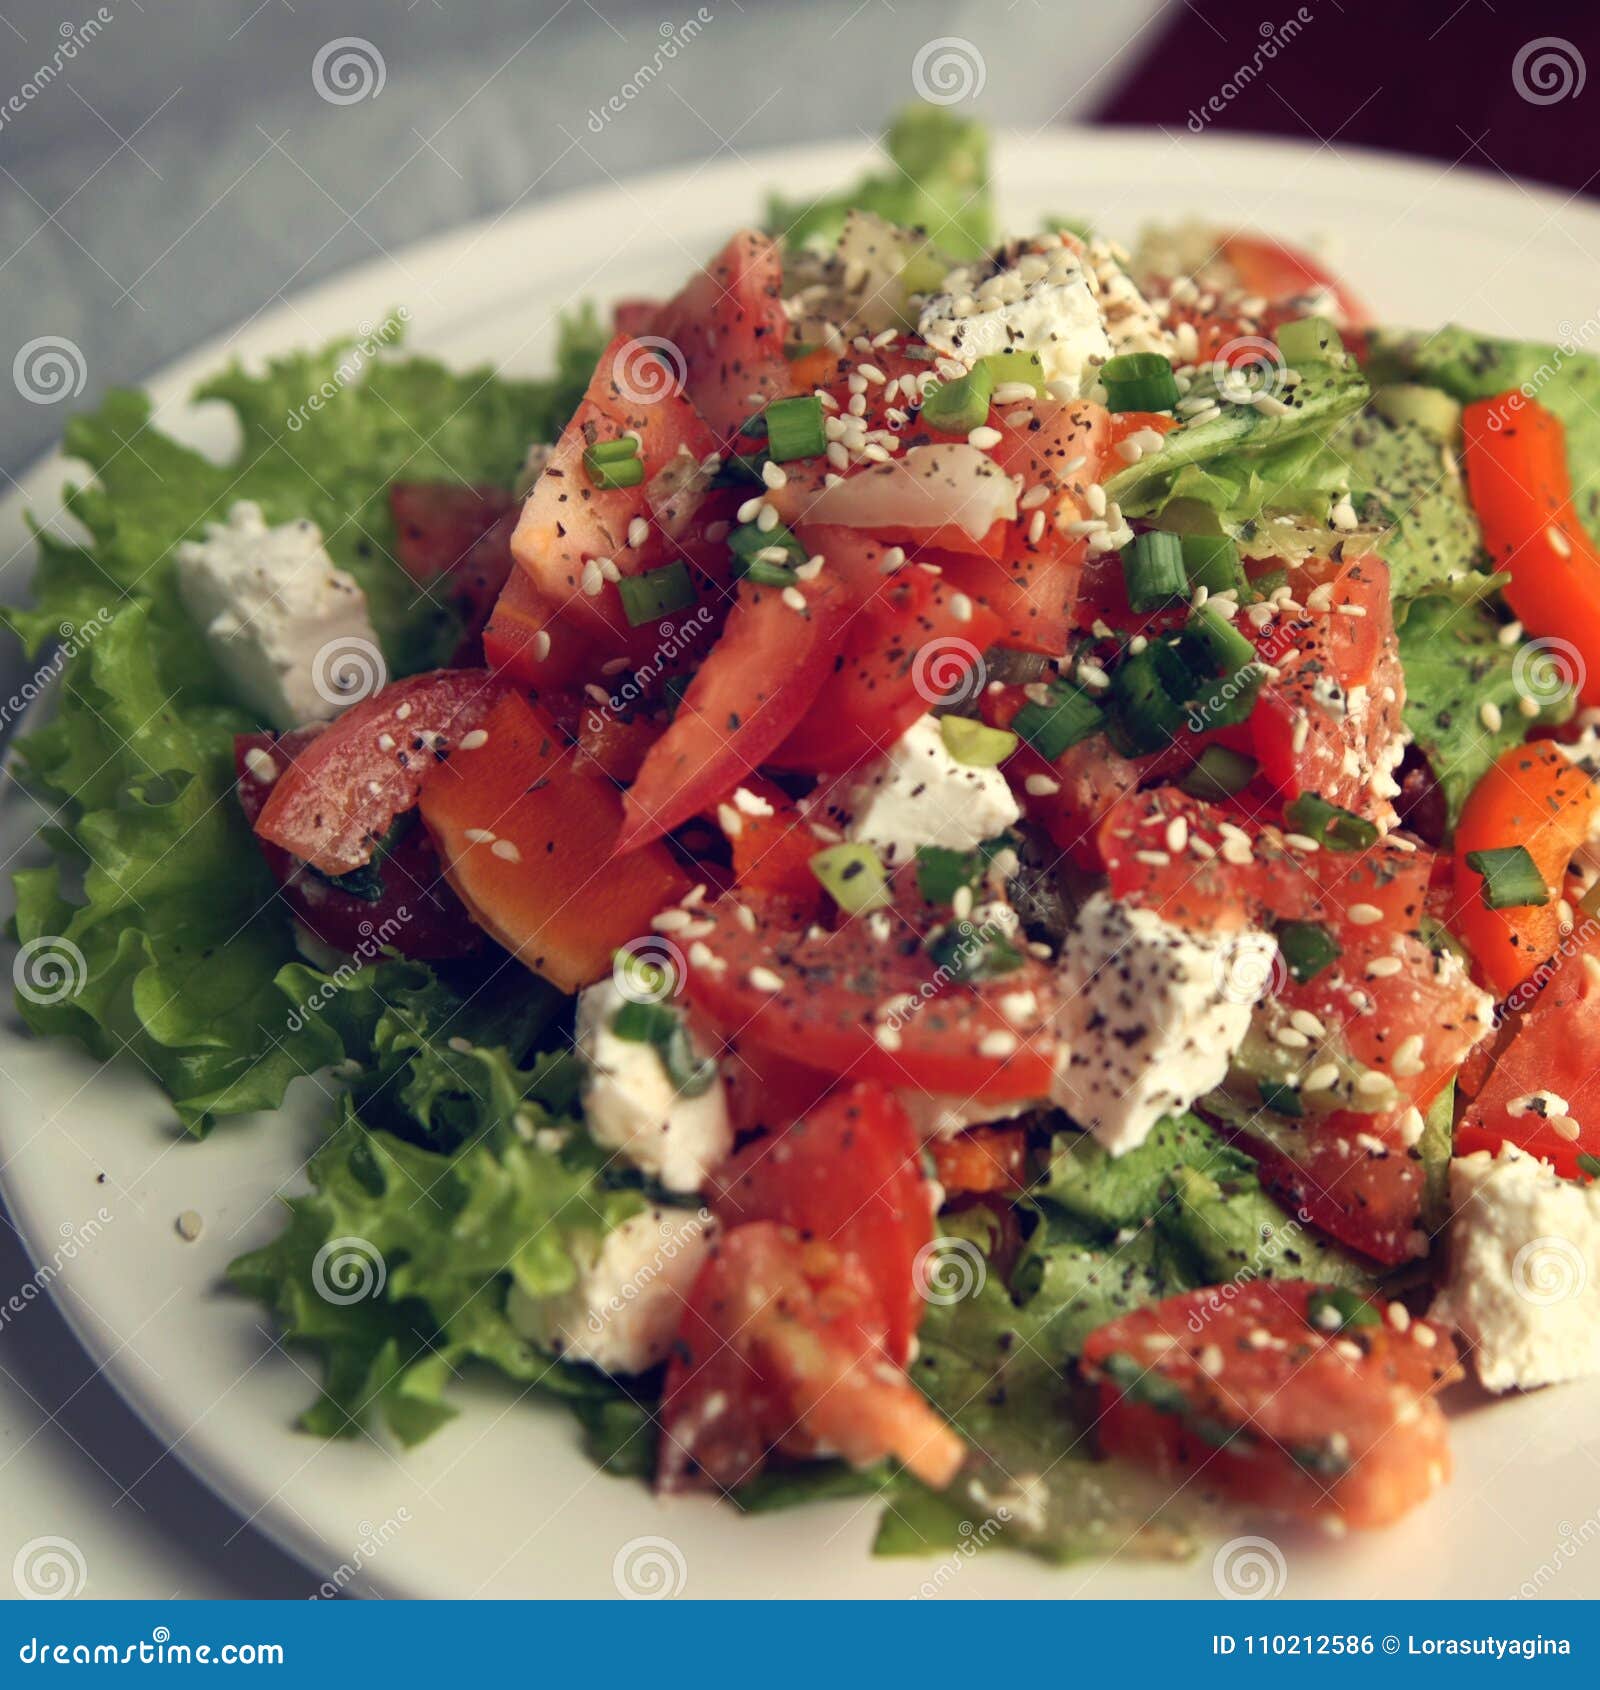 Colorful Salad With Vegetables And Cottage Cheese Stock Photo